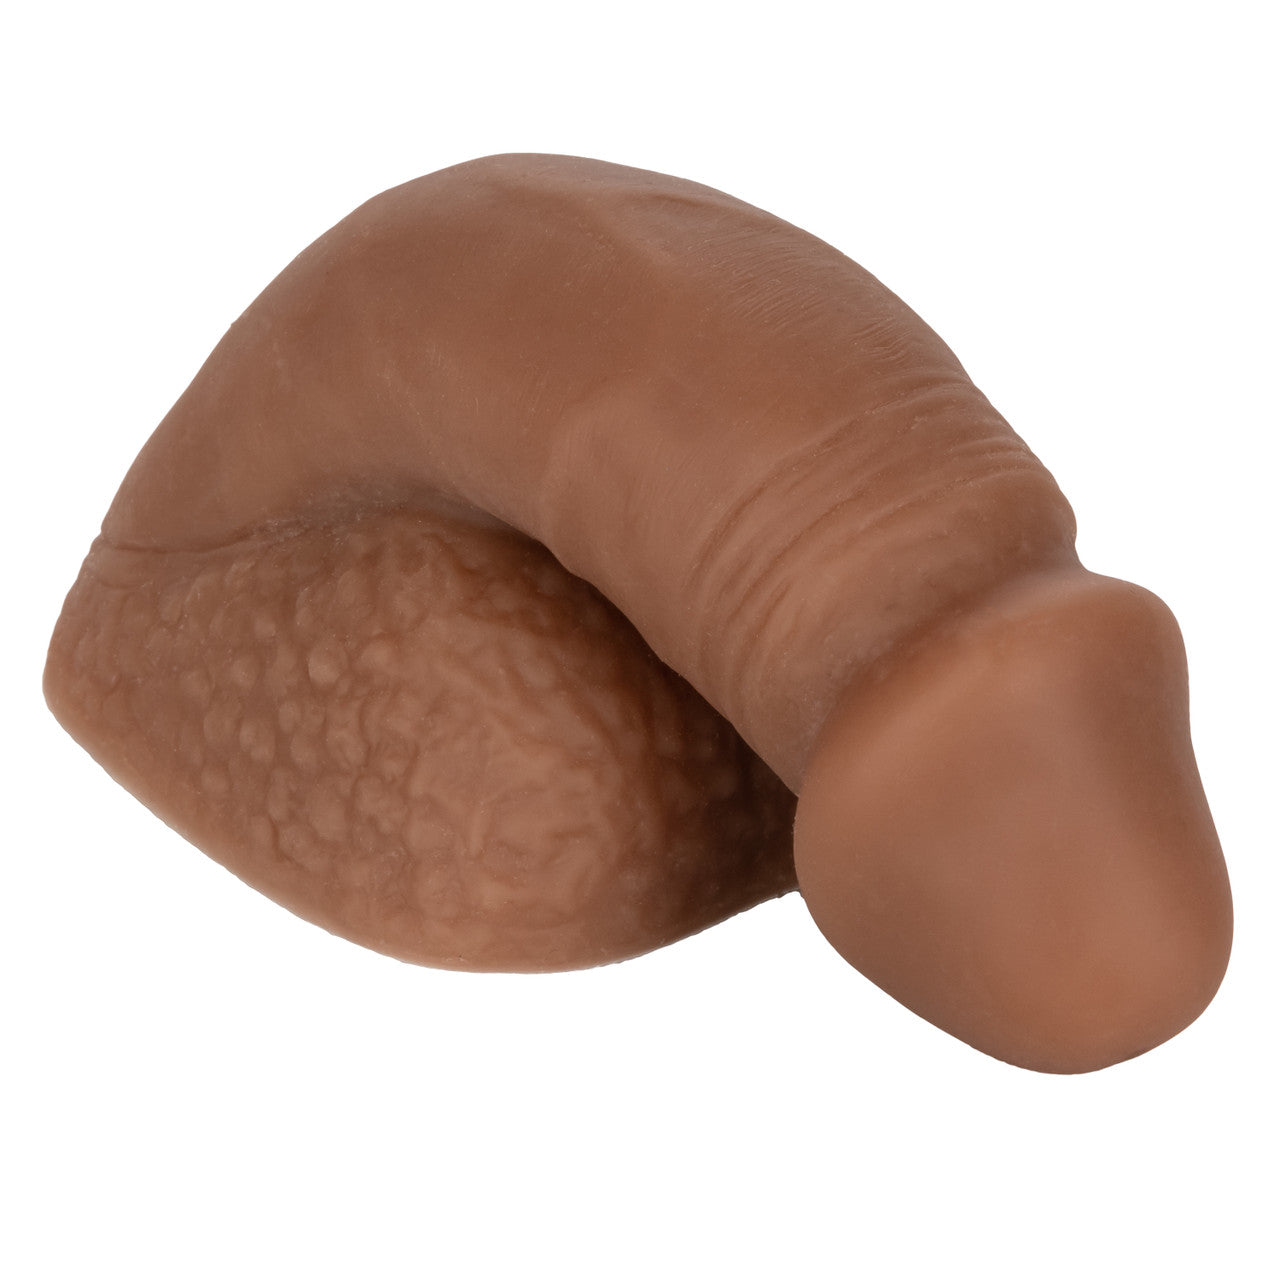 Packer Gear™ 4"/10.25 cm Silicone Packing Penis™ - Brown